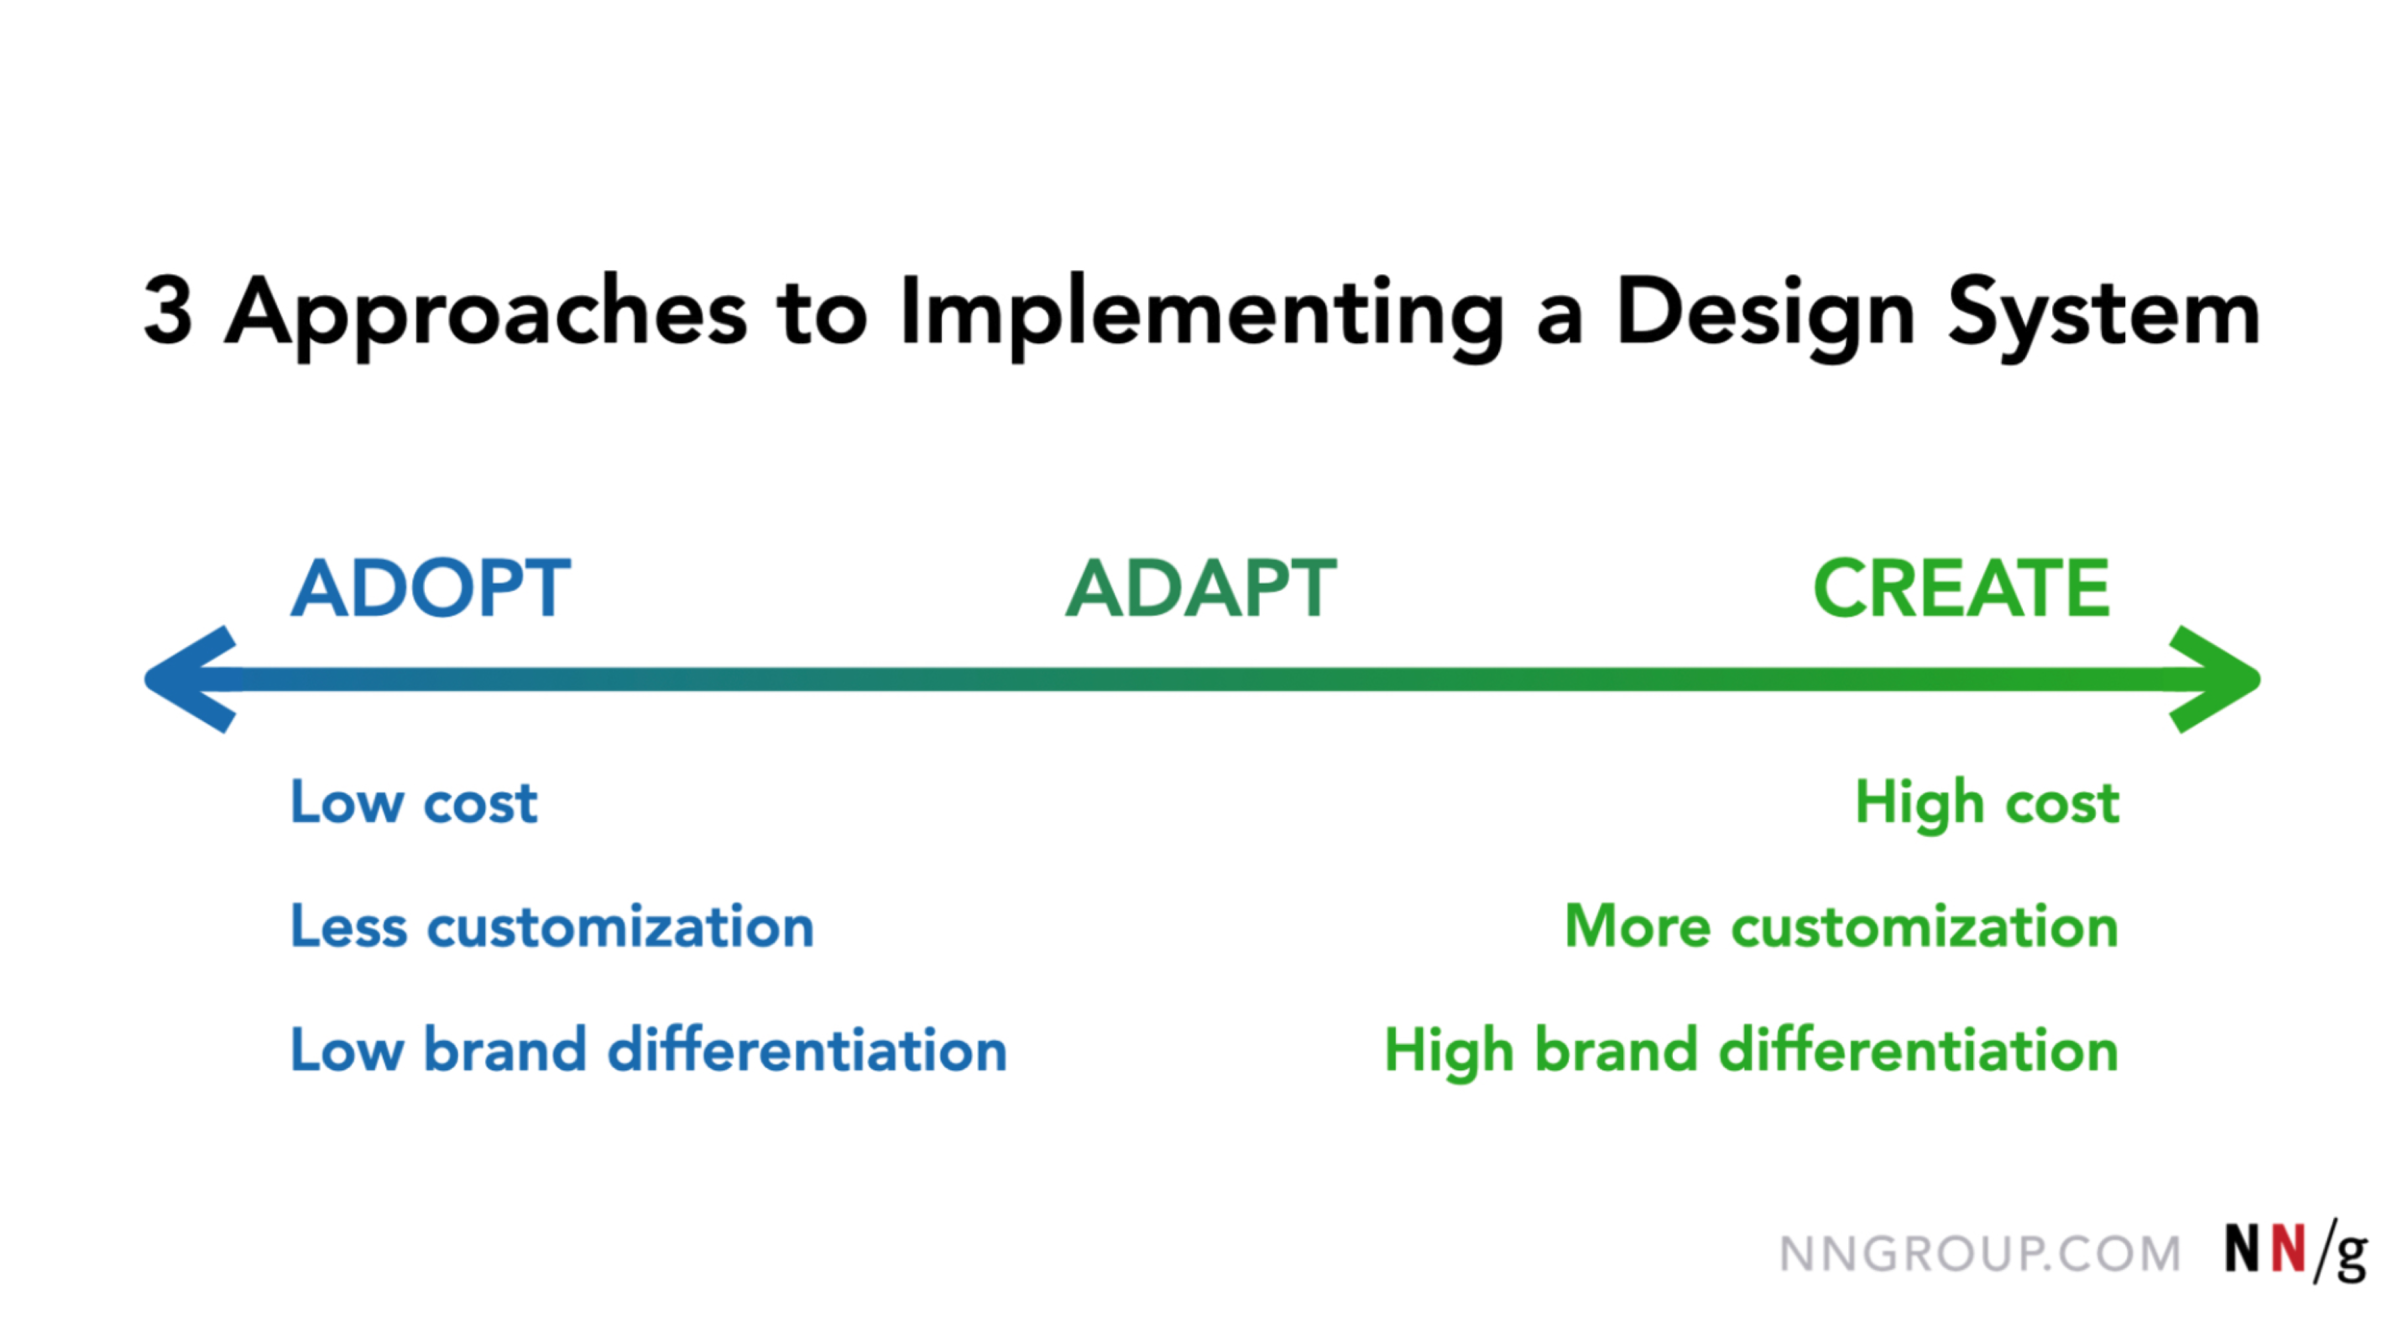 The Nielsen Norman Group sums up the 3 approaches to implementing a design system. Our approach, firmly rooted in the middle, aims to strike a balance between efficiency and flexibility.